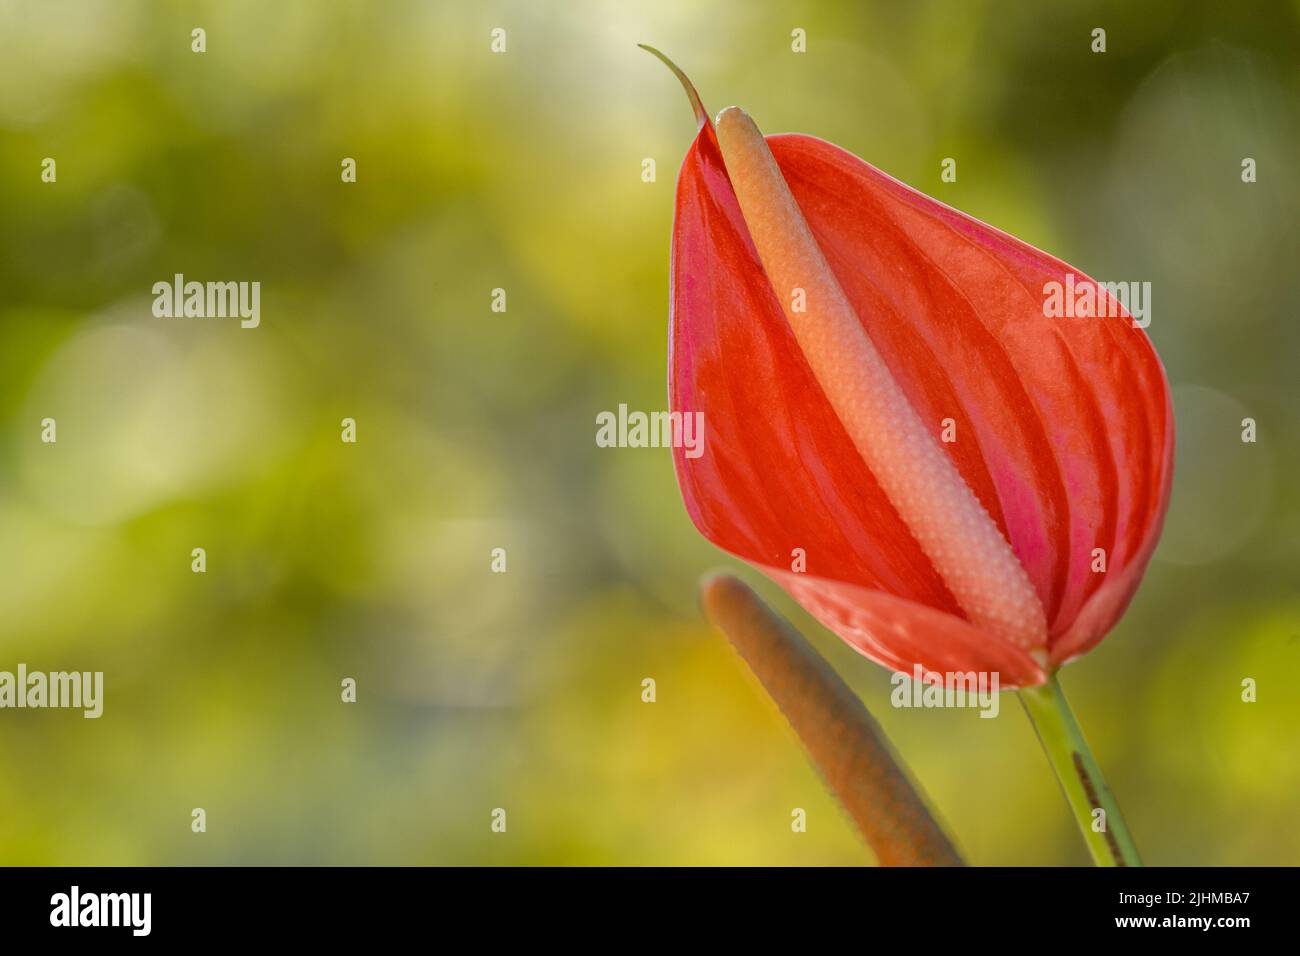 Flamingo lily flower with red petals with yellow white parts, isolated on a blurry background Stock Photo